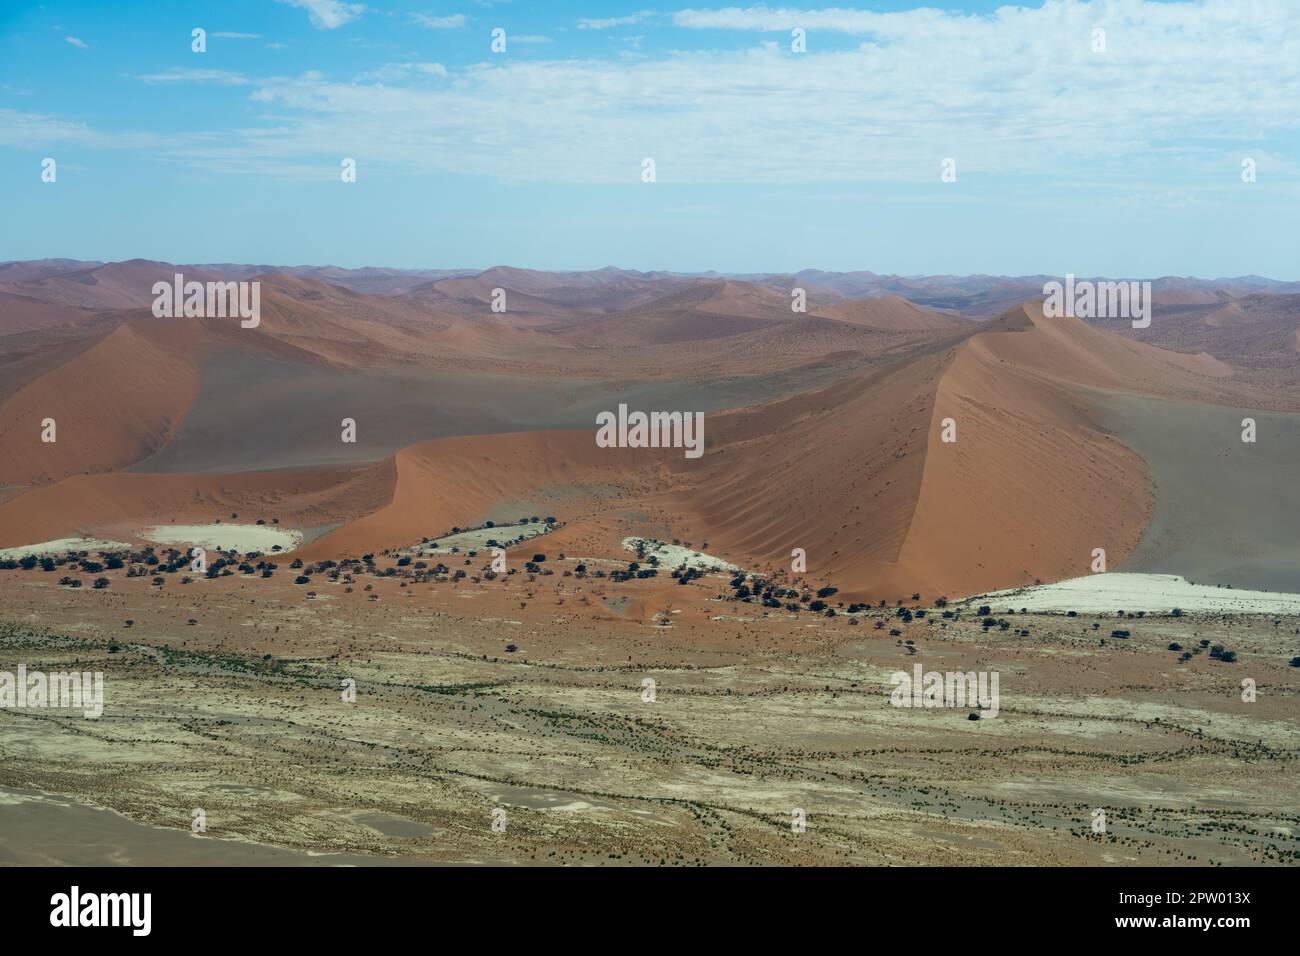 Aerial photograph of the dunes in Namibia Stock Photo